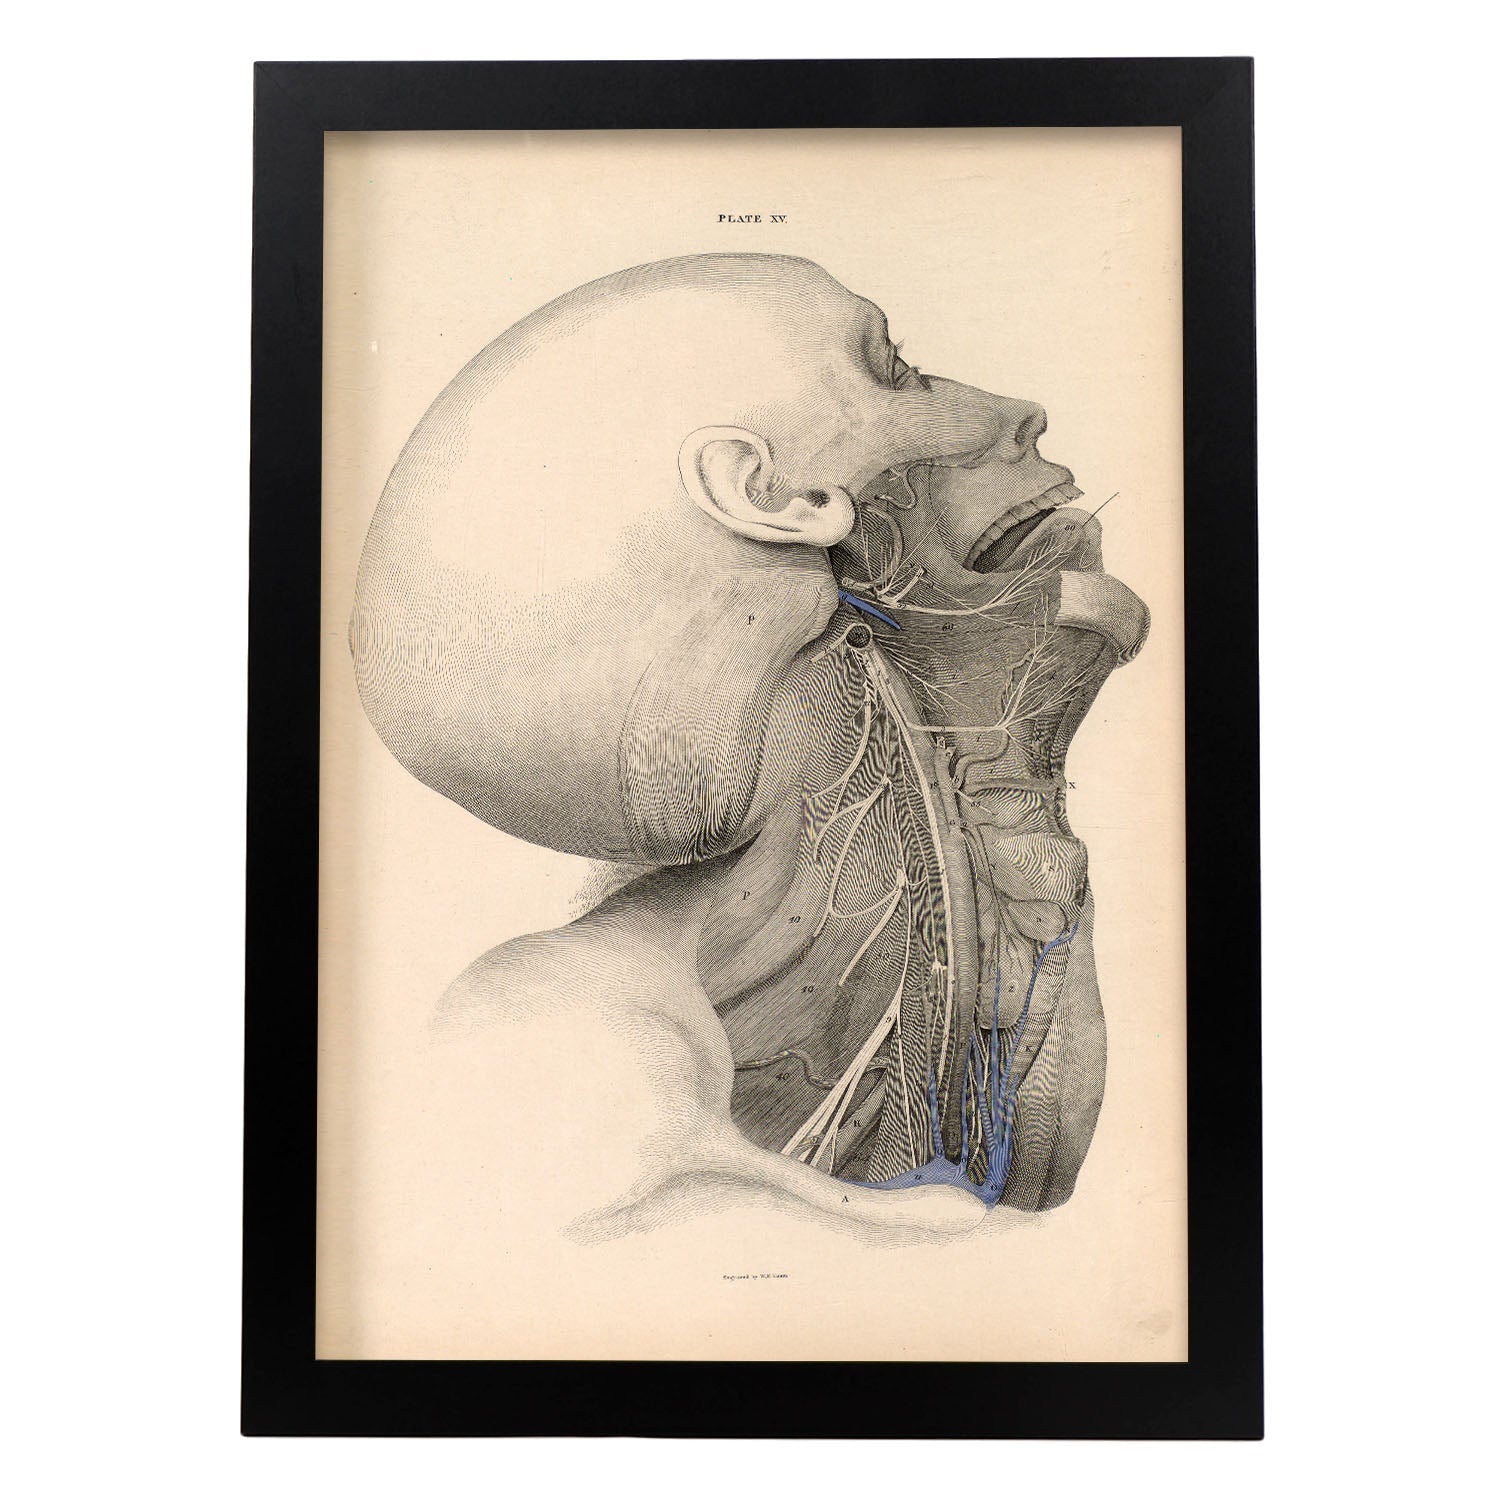 Dissection of the face and neck-Artwork-Nacnic-A3-Sin marco-Nacnic Estudio SL